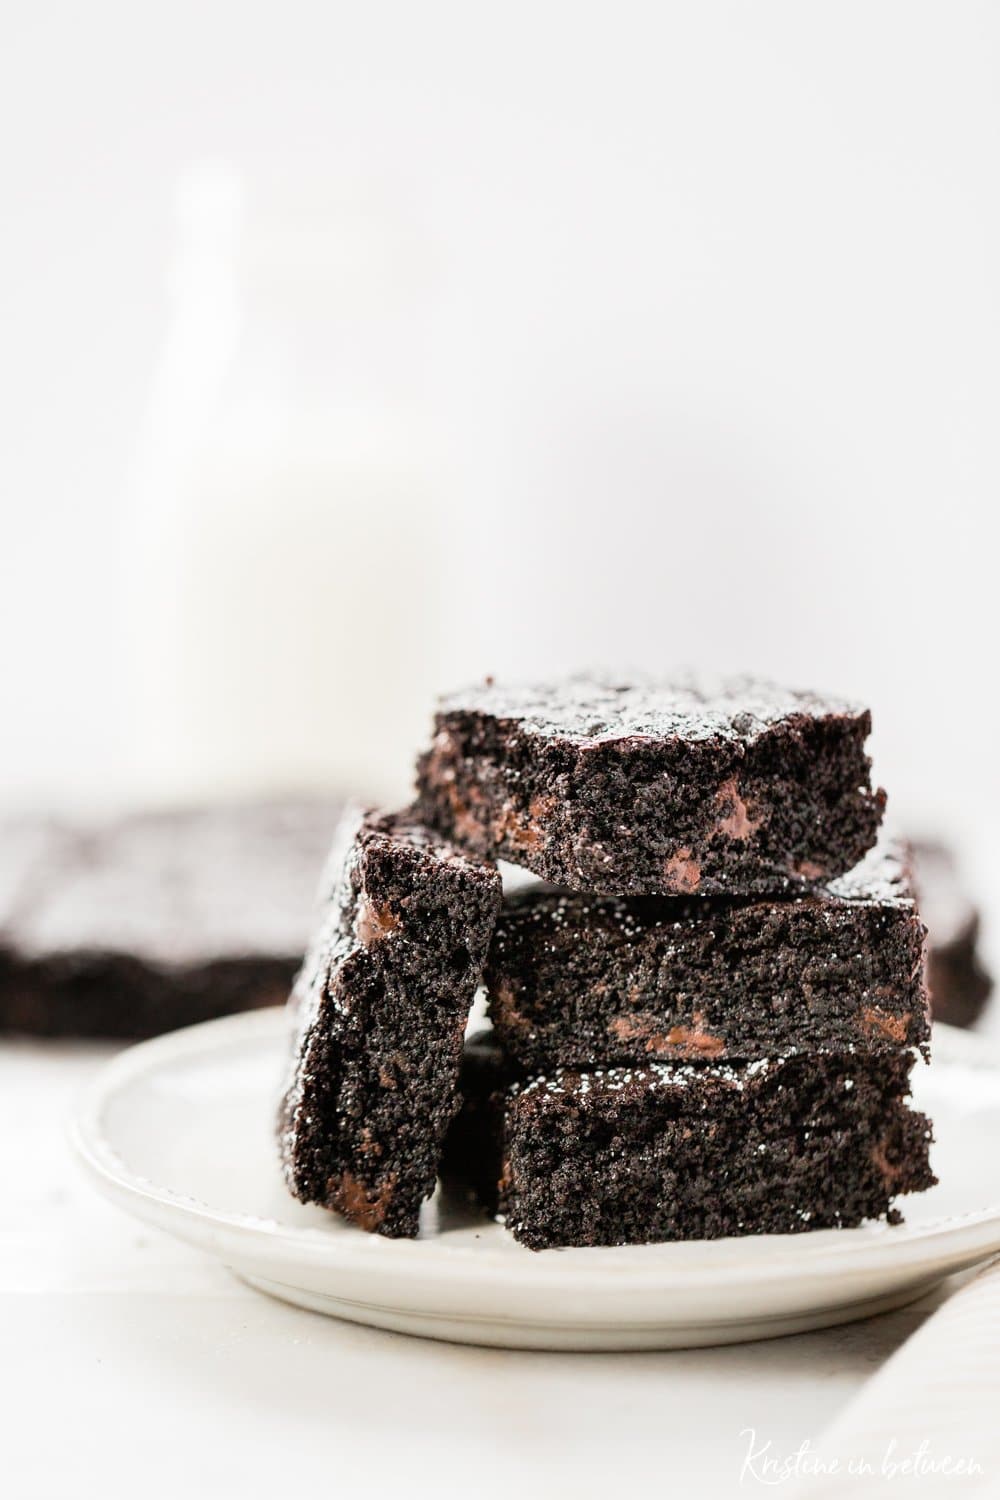 Super rich dark chocolate fudge brownies that are thick and chewy.